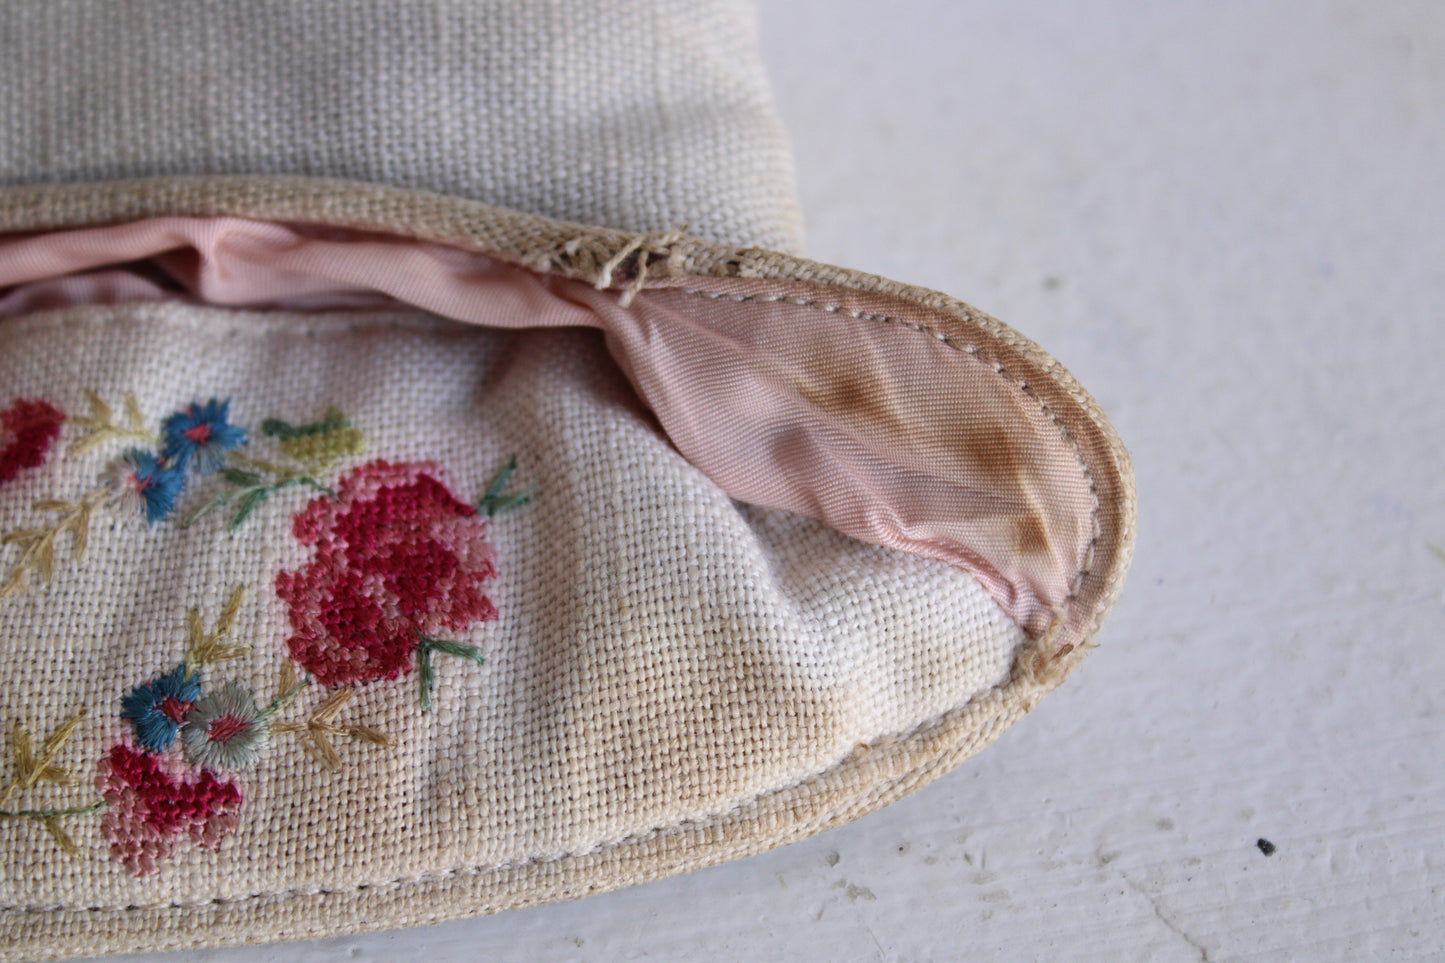 Vintage 1930s 1940s Embroidered Hold All Bag